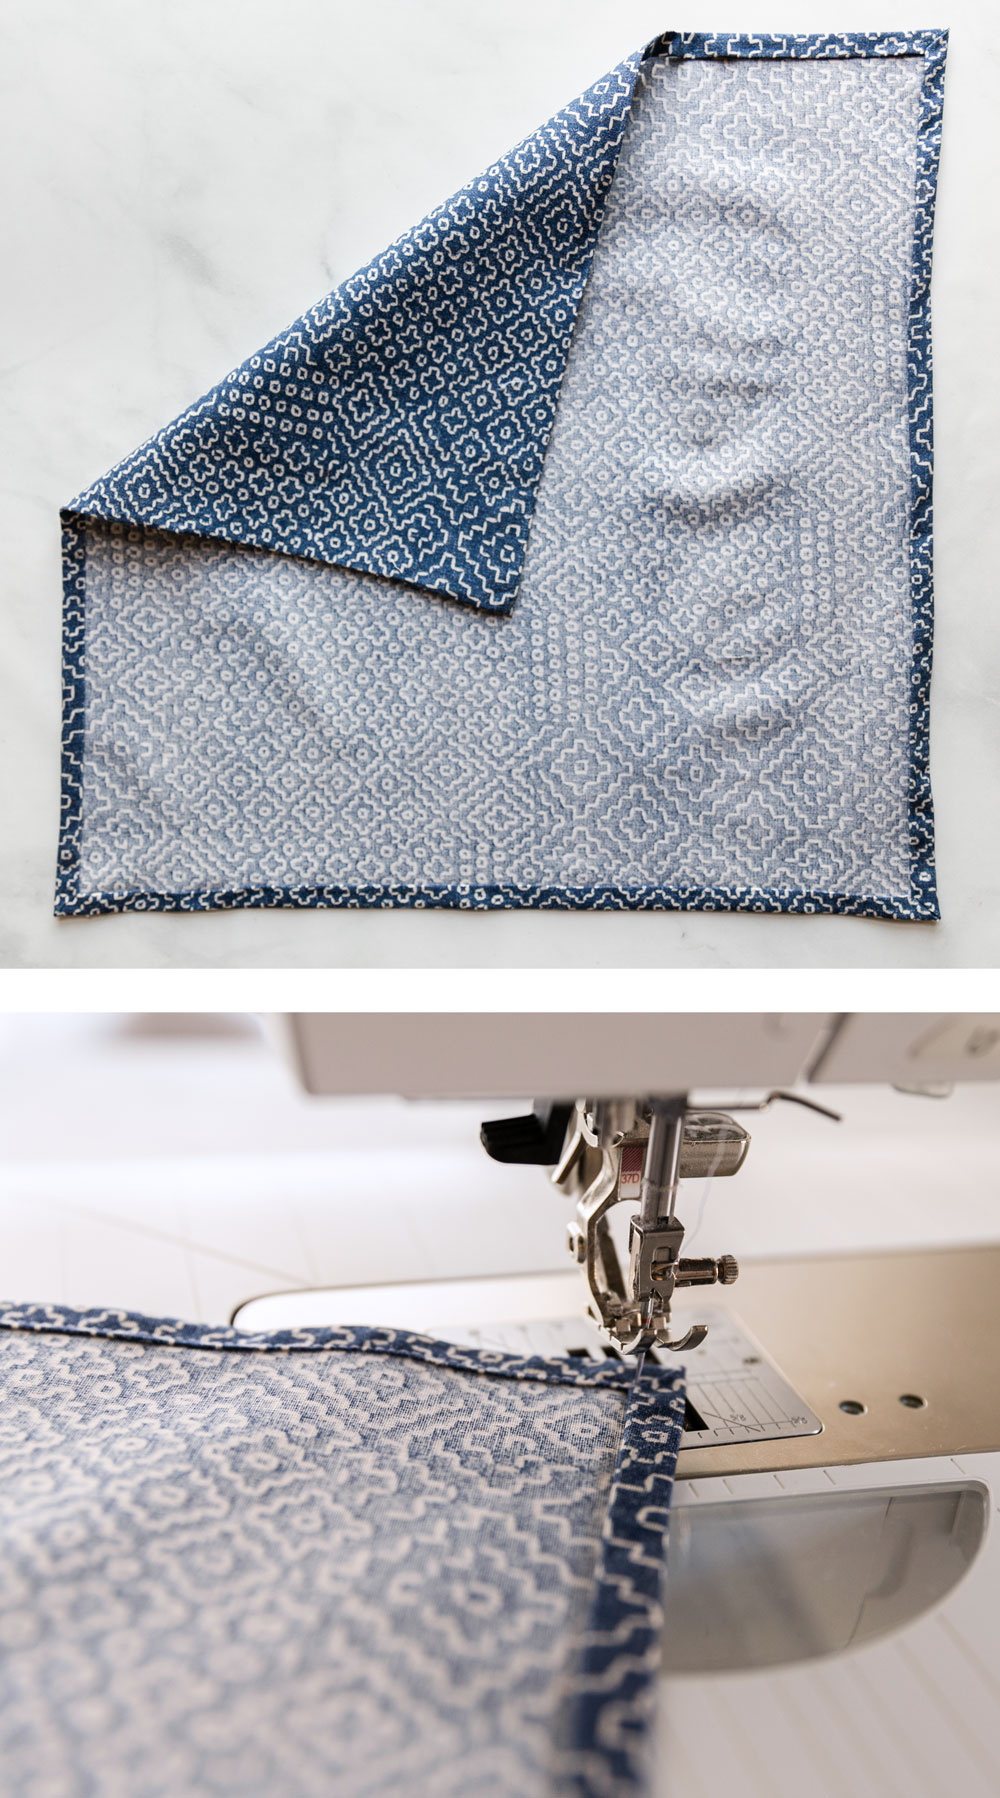 Learn how to sew a napkin in this beginner-friendly DIY cloth napkins tutorial. This fat quarter friendly sewing tutorial is incredibly fast and easy! suzyquilts.com #sewingtutorial #diynapkins